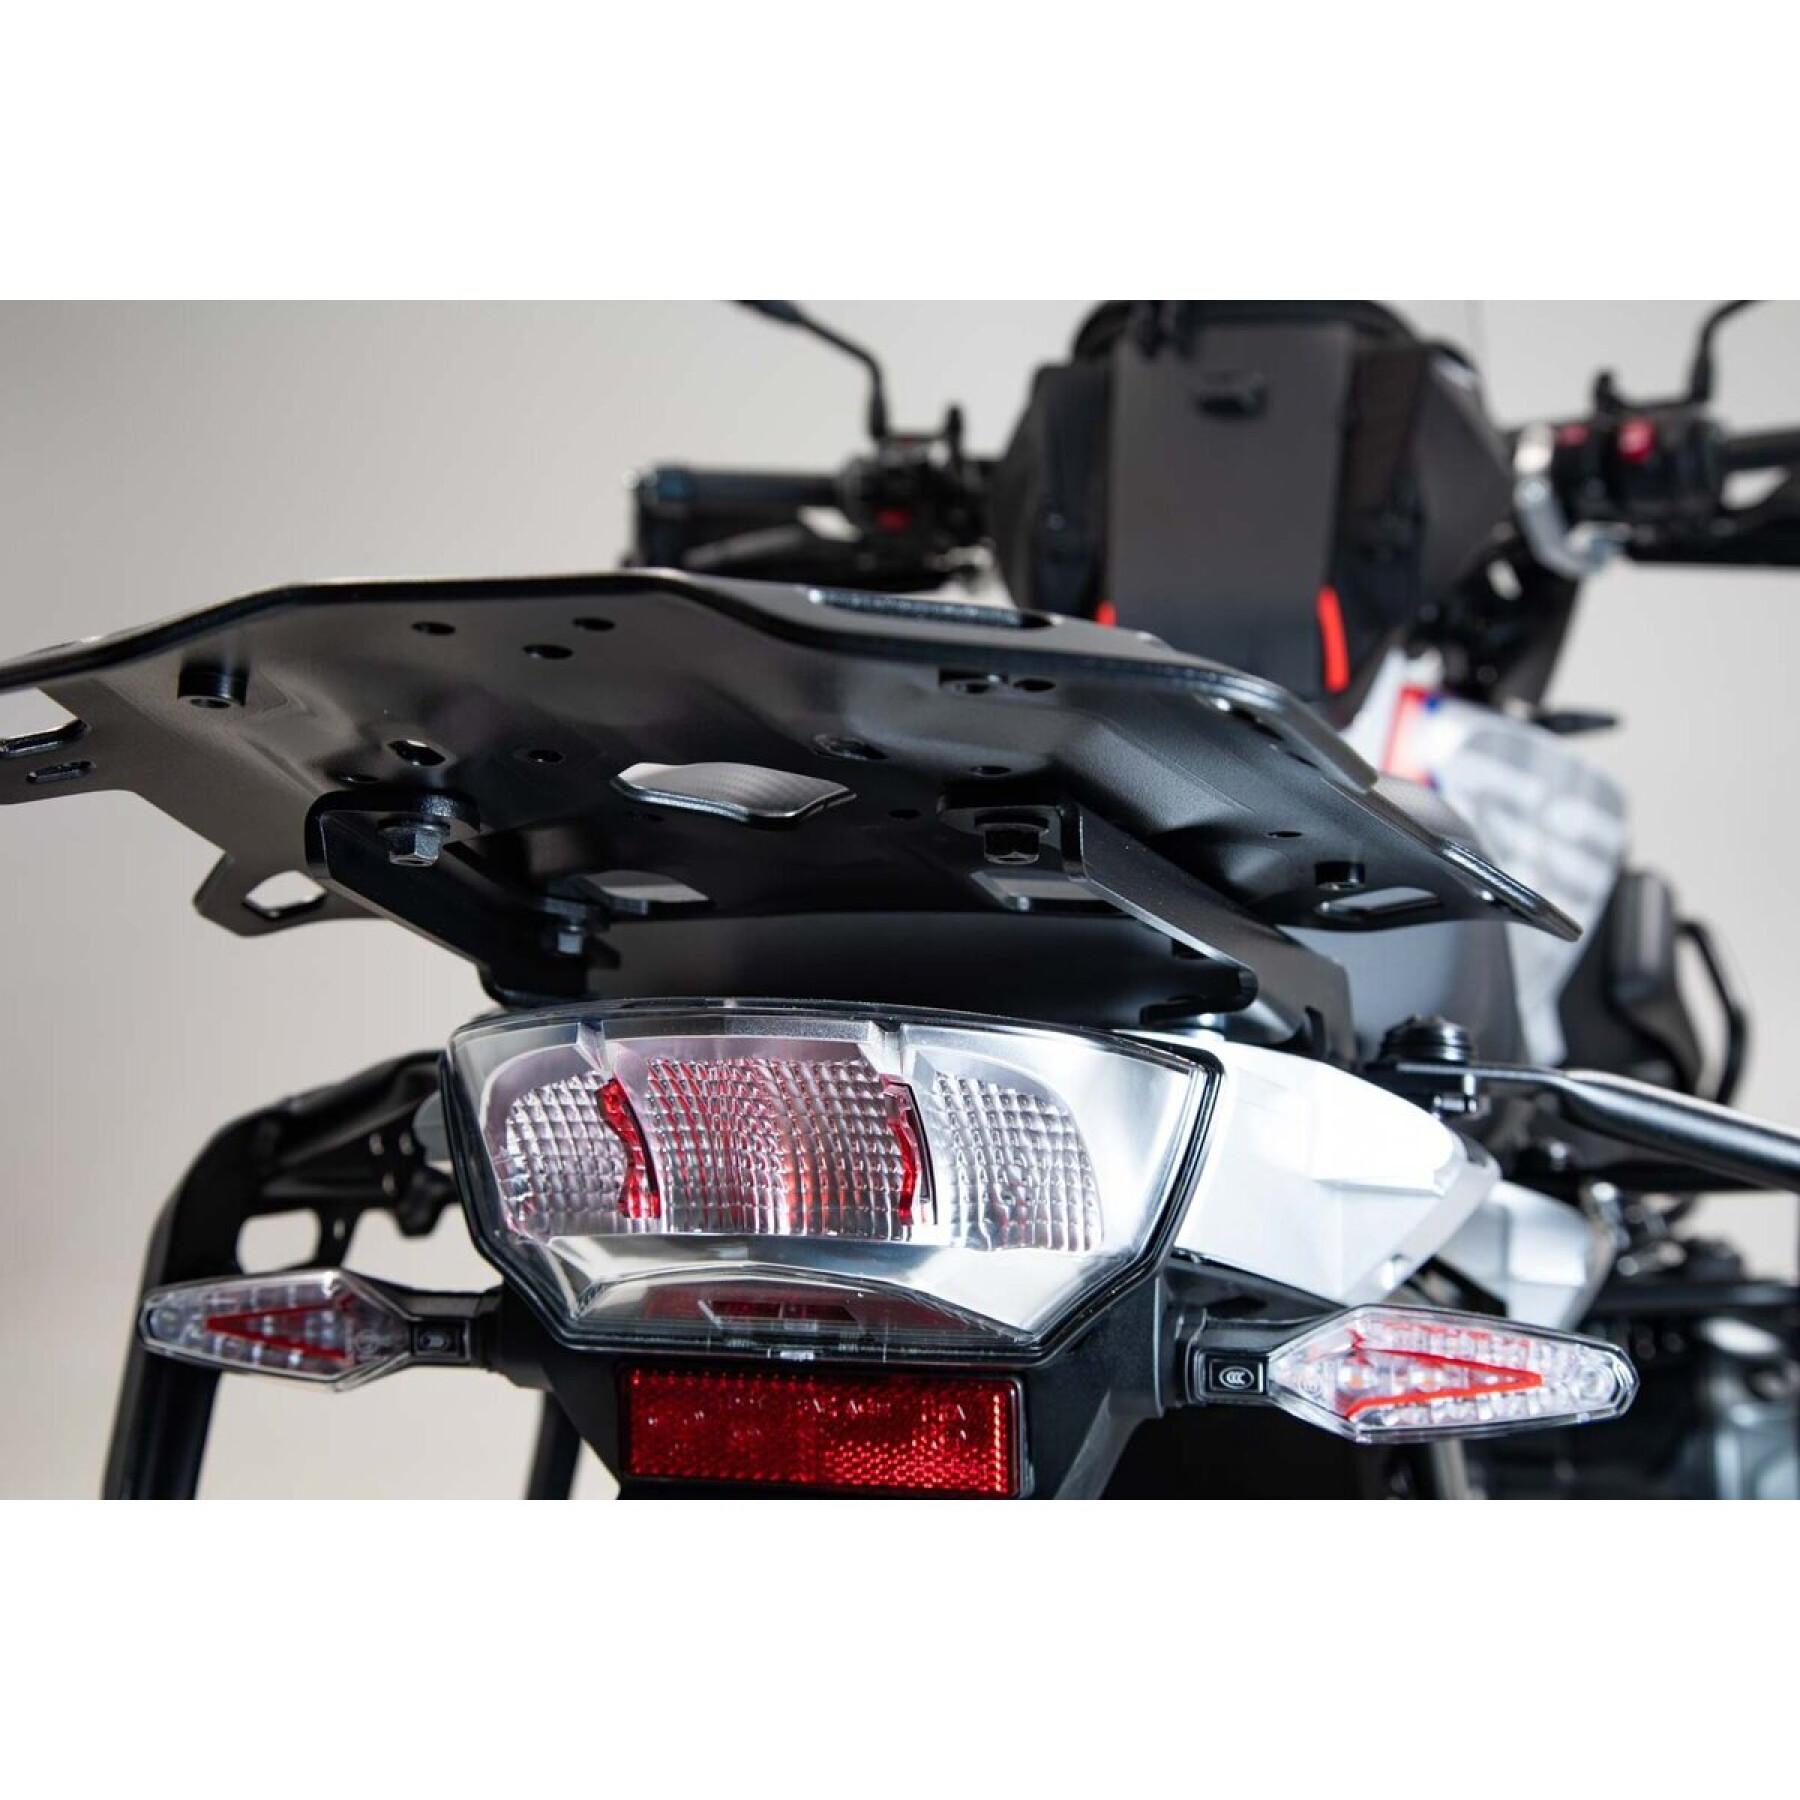 Motorcycle top case system SW-Motech DUSC BMW R 1200/1250 GS LC Adv (13-)